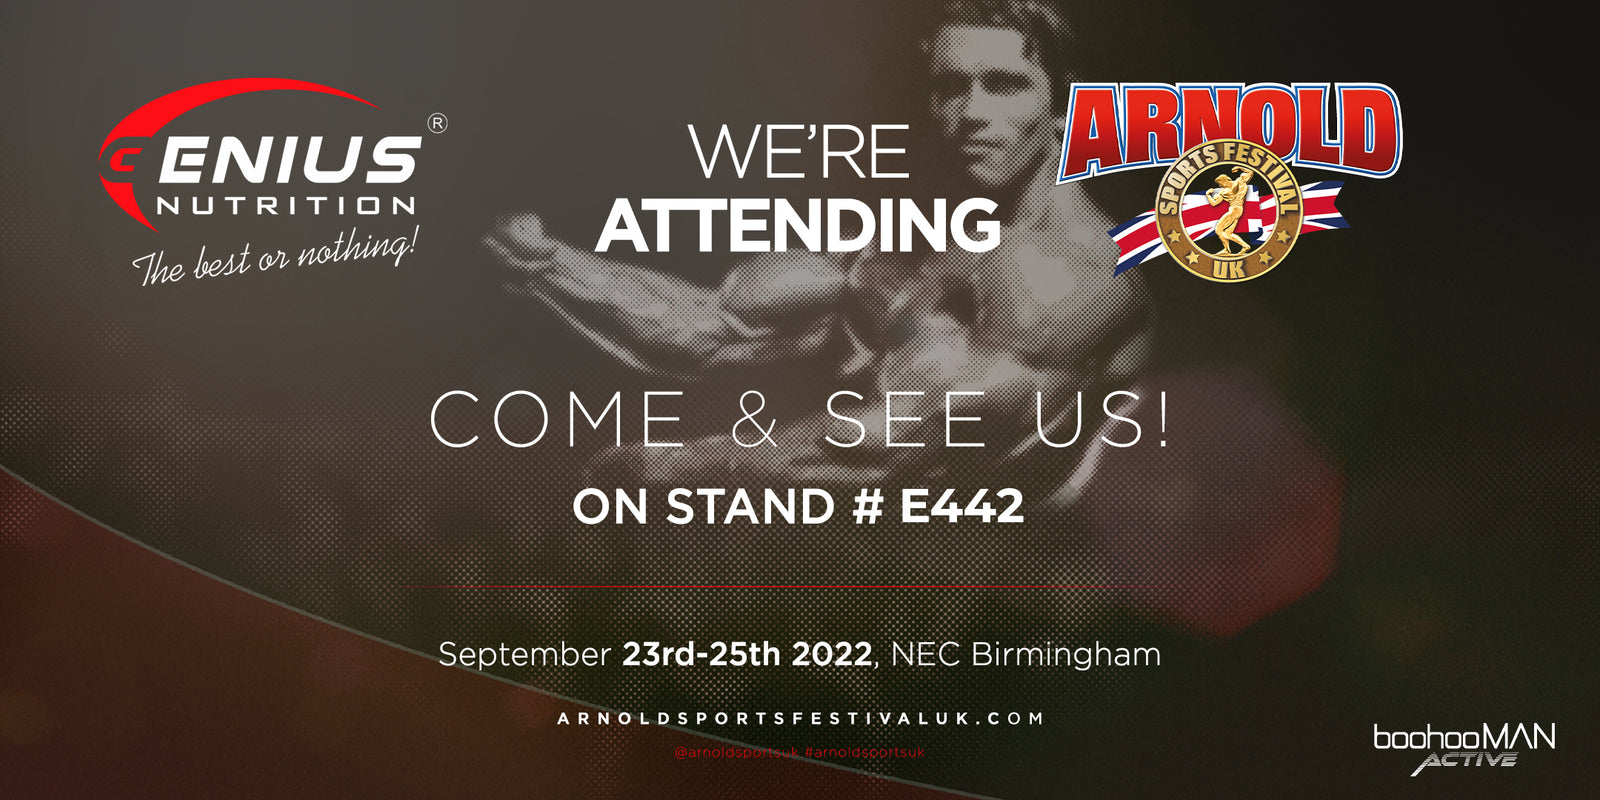 MEET US AT ARNOLD SPORTS FESTIVAL 2022